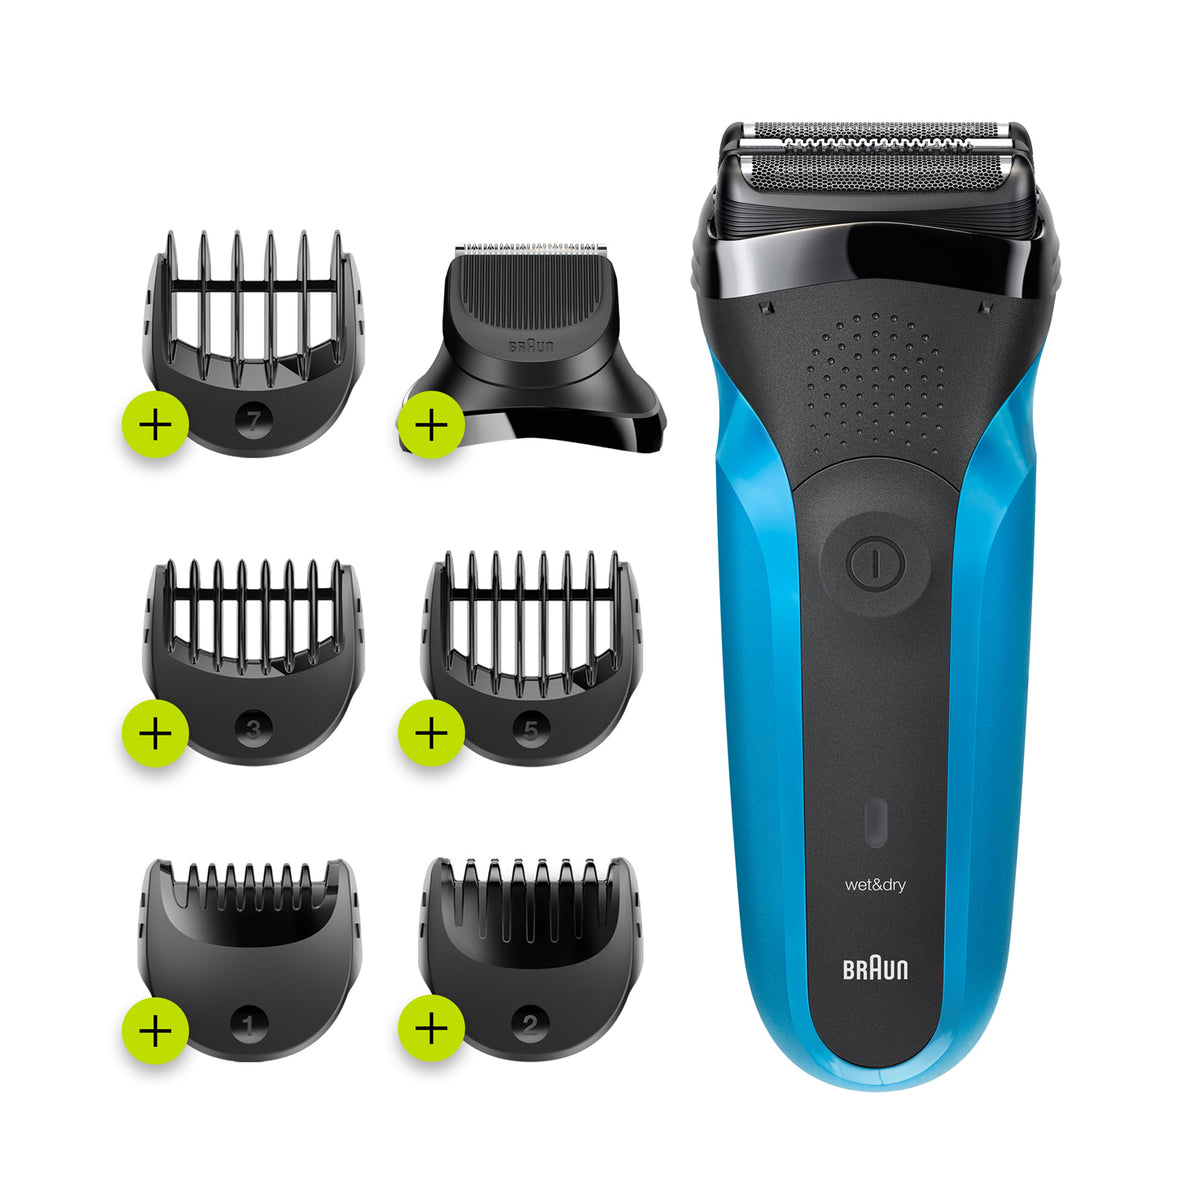 Braun Series 3 Shave&Style 310BT Wet & Dry shaver with trimmer head and 5 combs, black / blue.